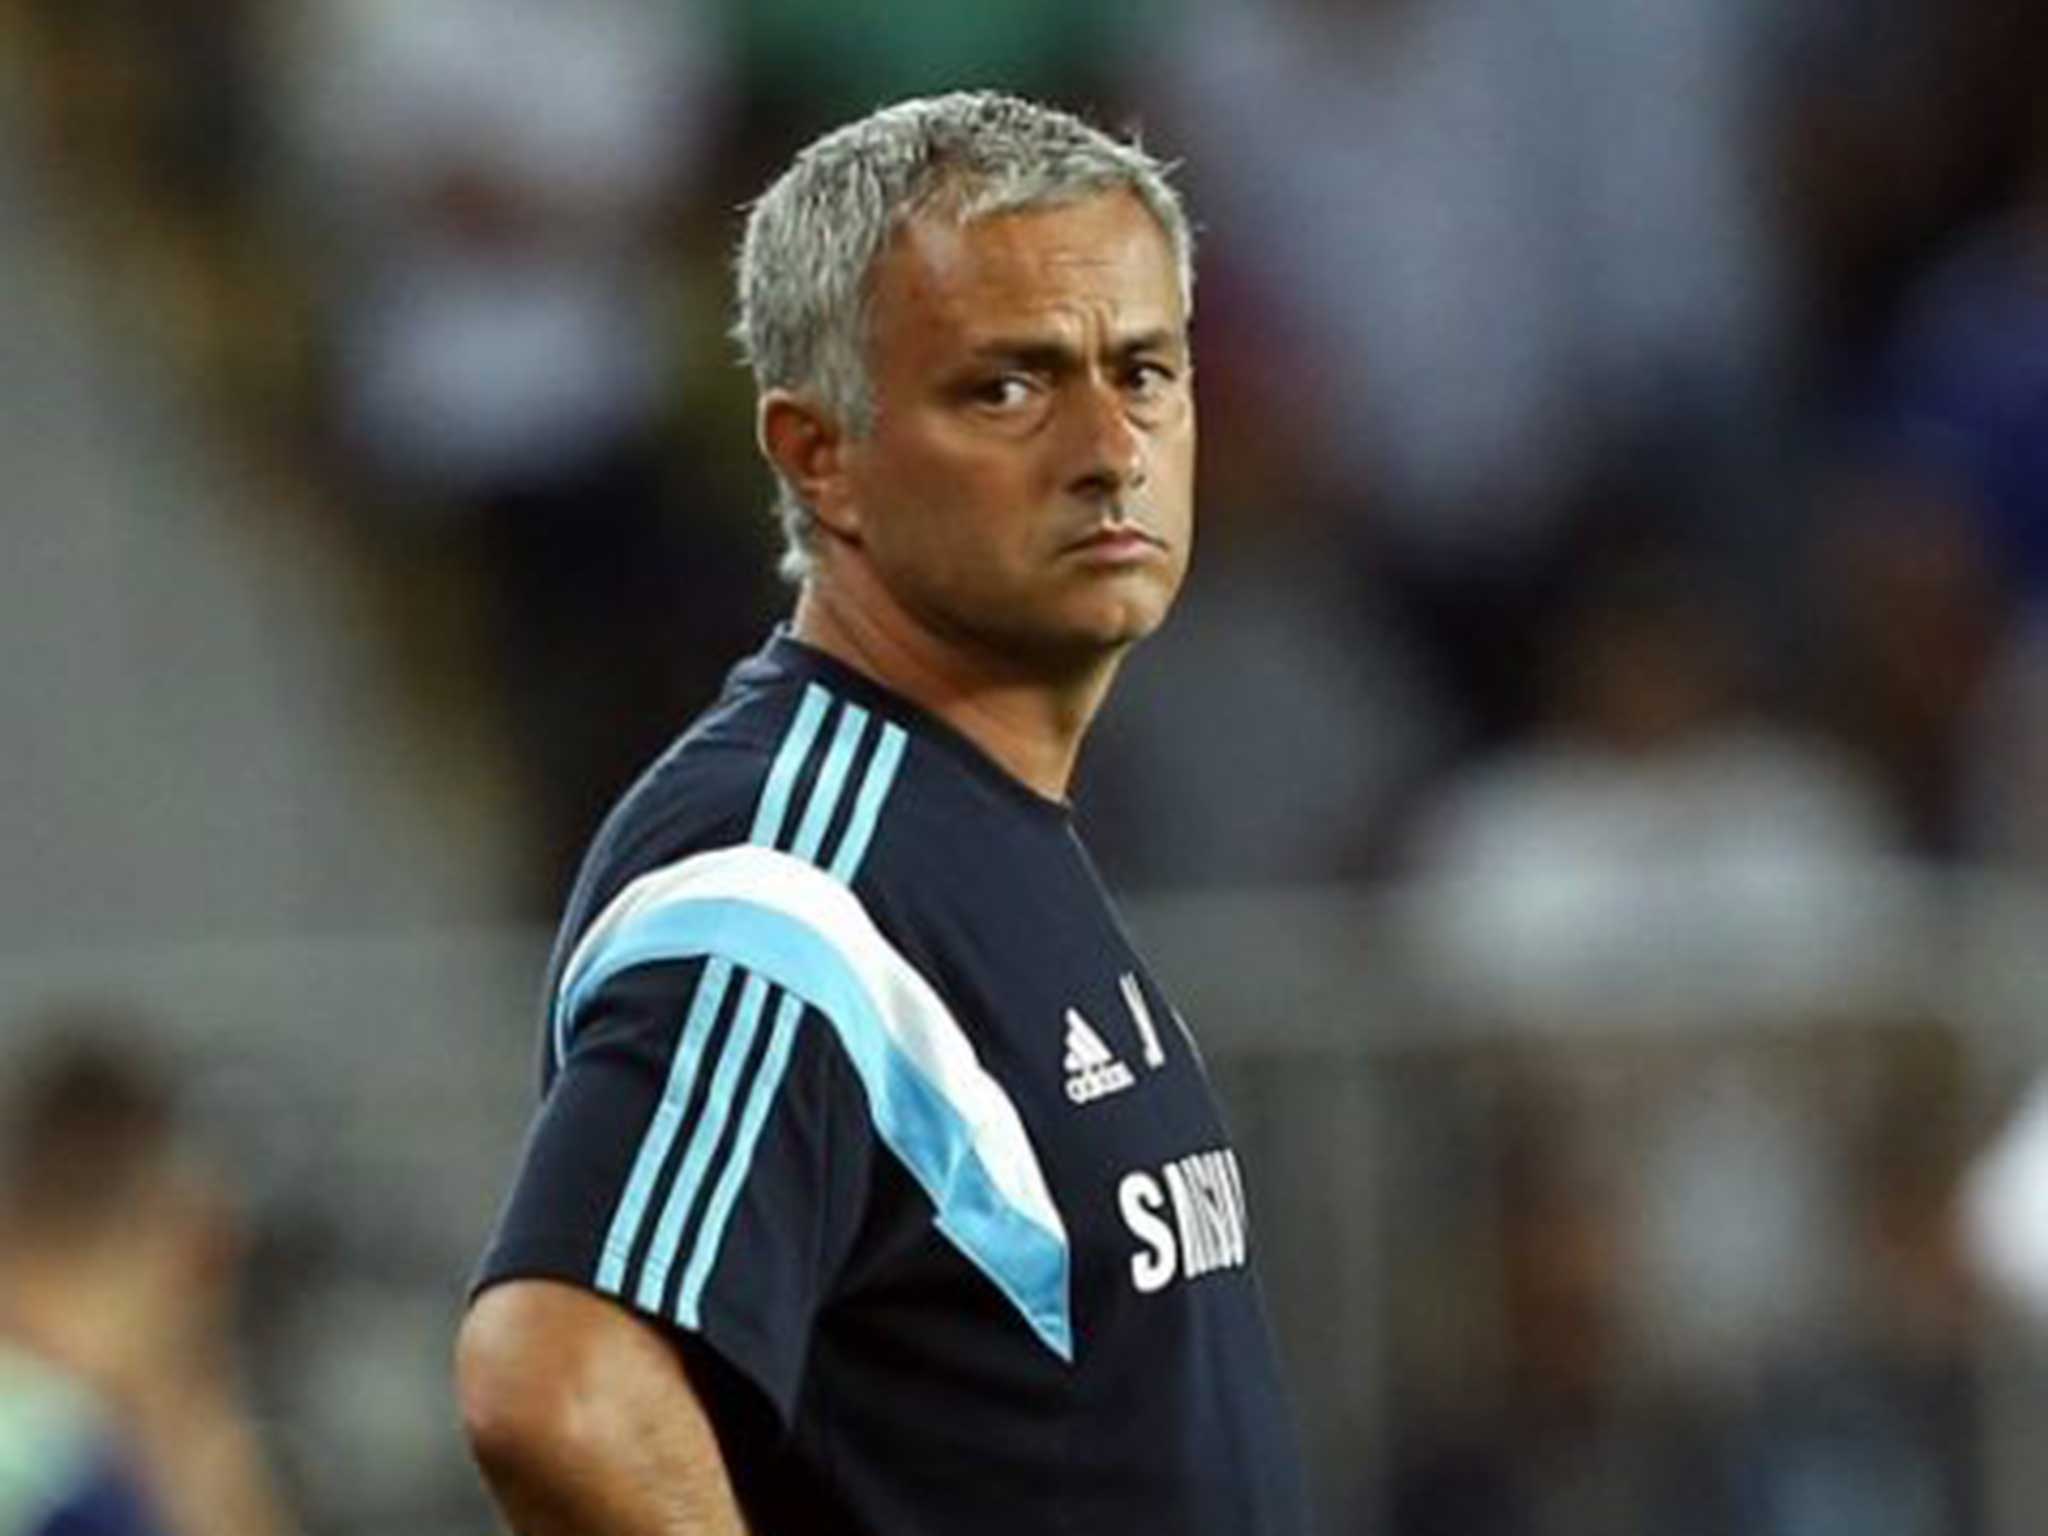 Jose Mourinho looks on from the sidelines